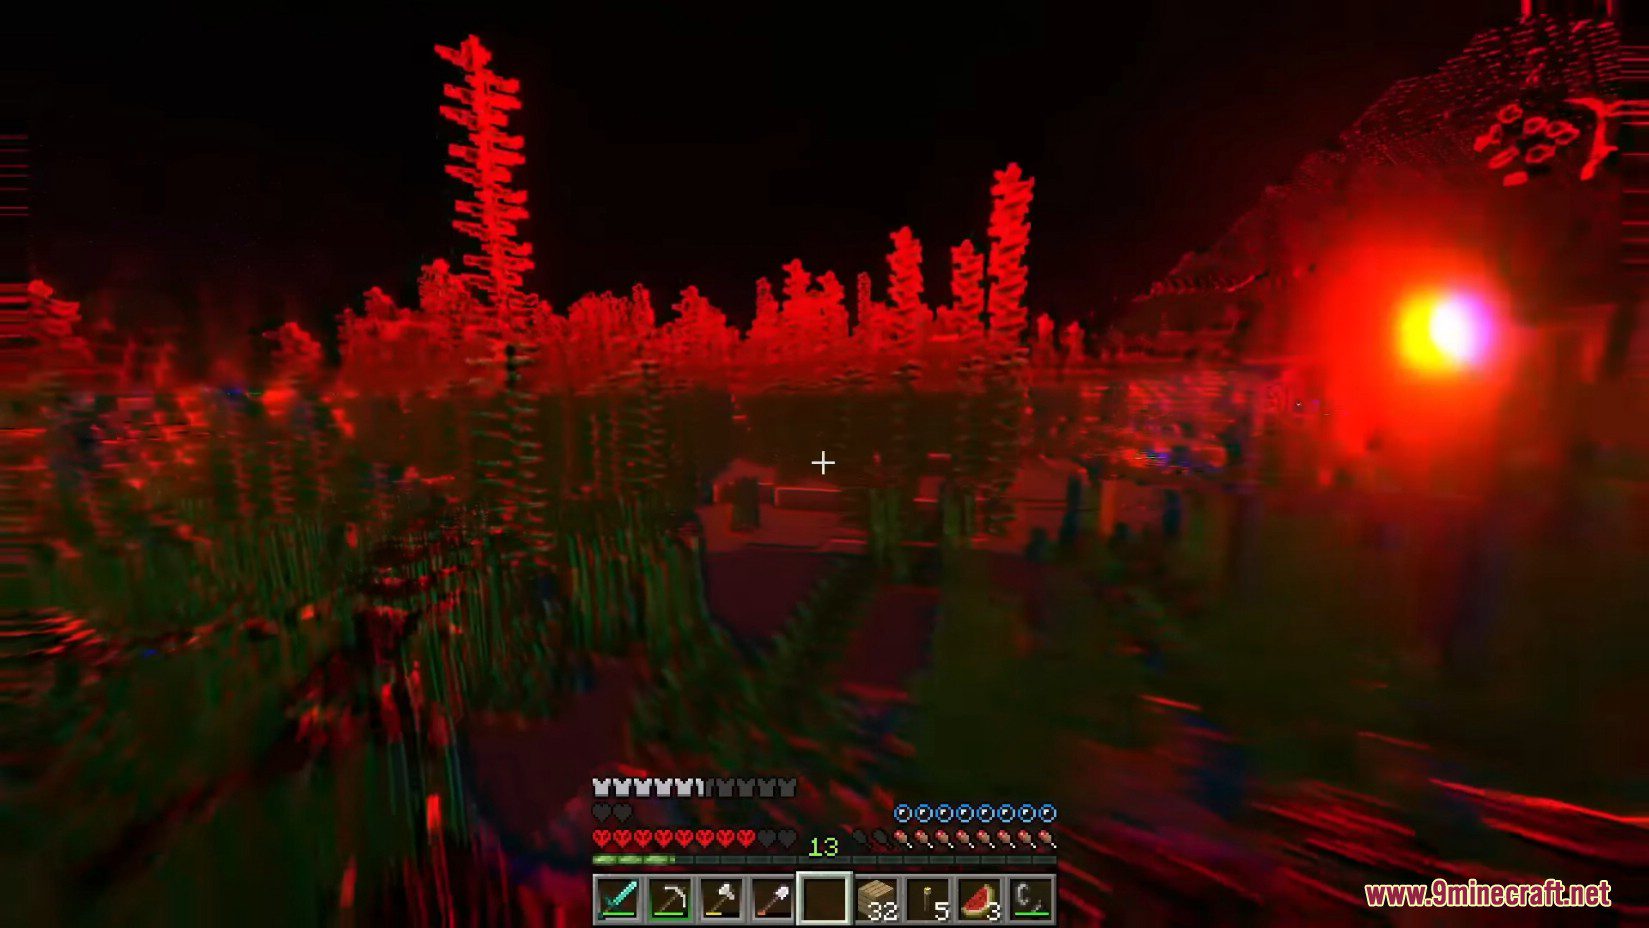 Super Ugly Shaders (1.20.4, 1.19.4) - Shaderpack Causes Hallucinations and Dizziness 4